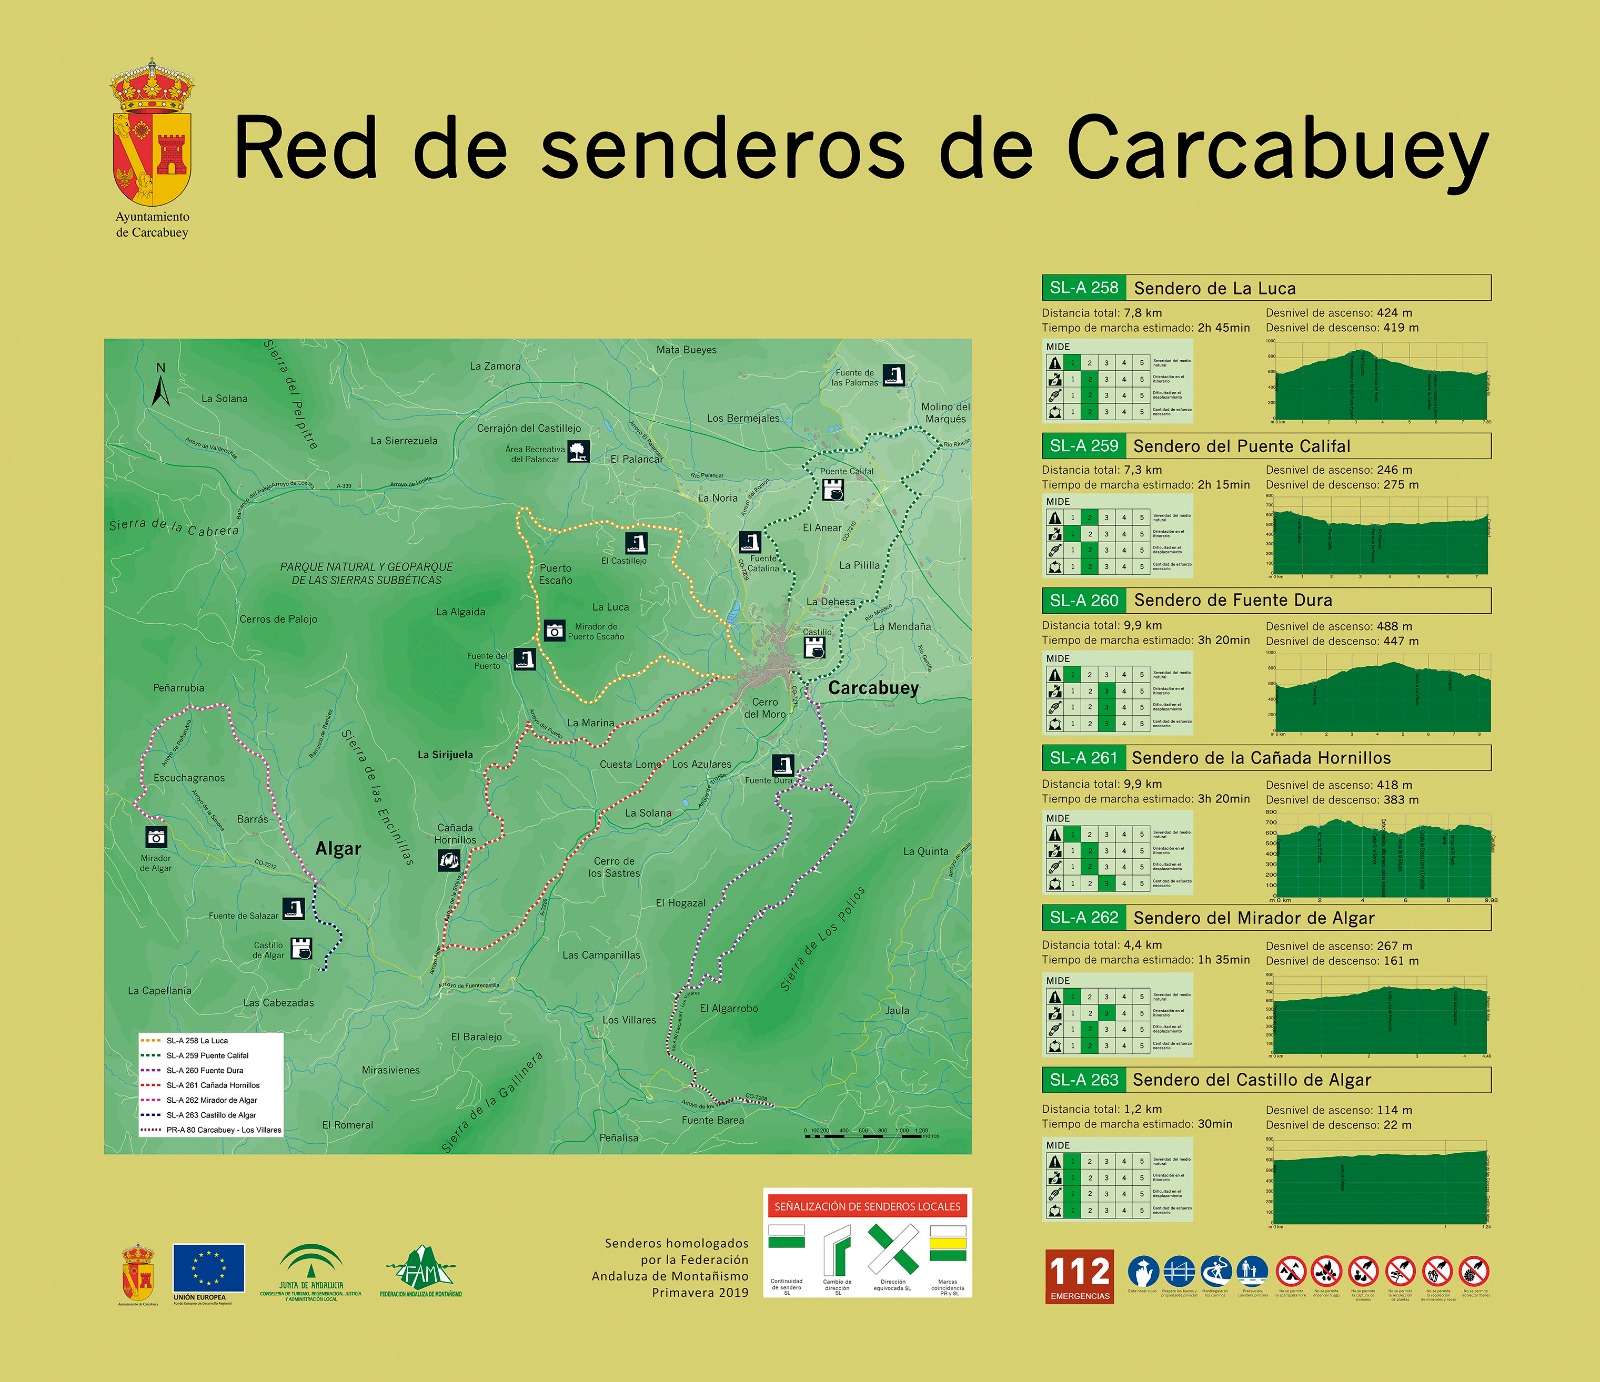 Carcabuey Trail Guide